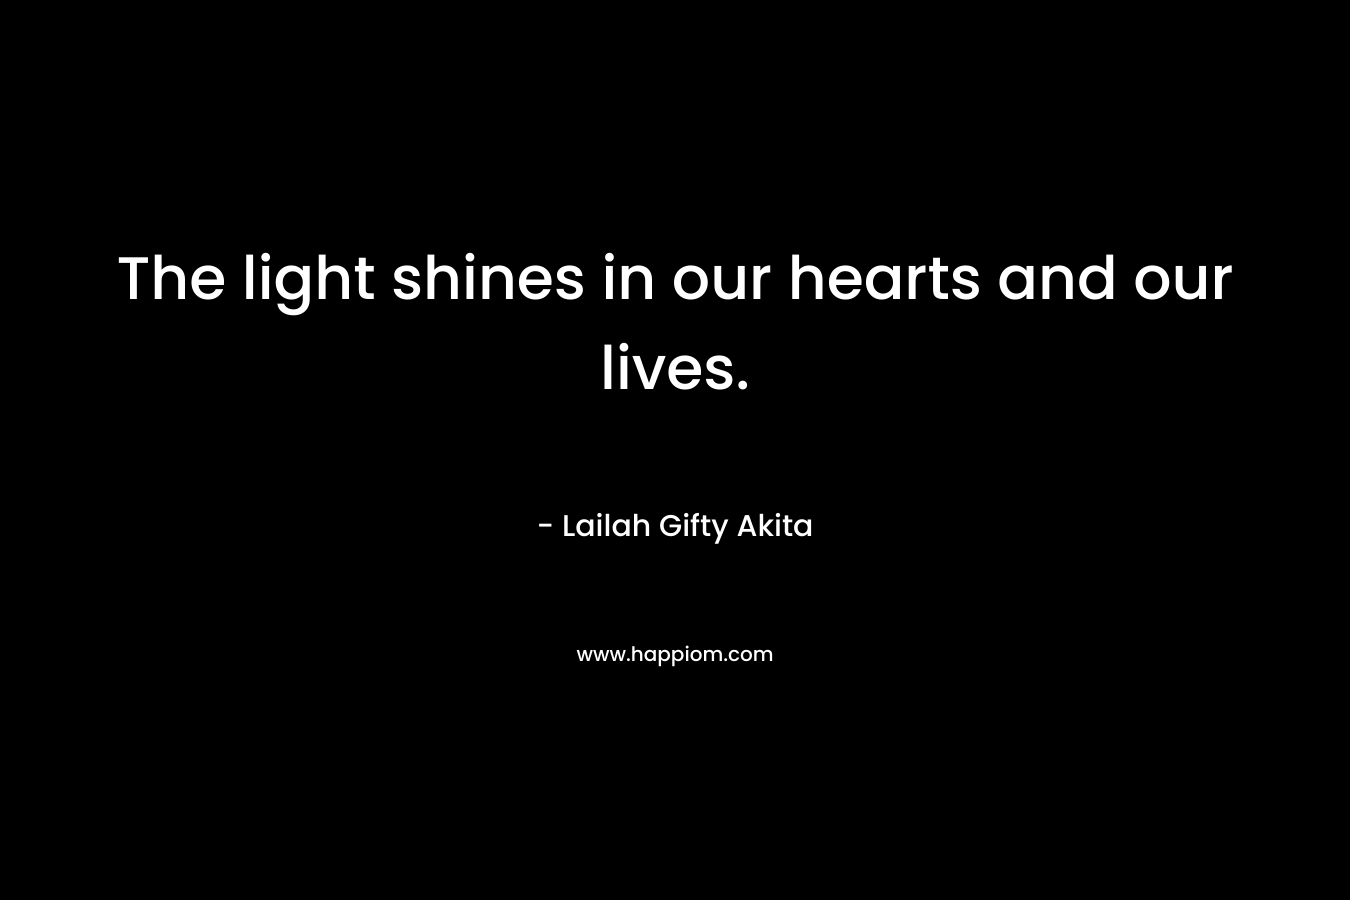 The light shines in our hearts and our lives.